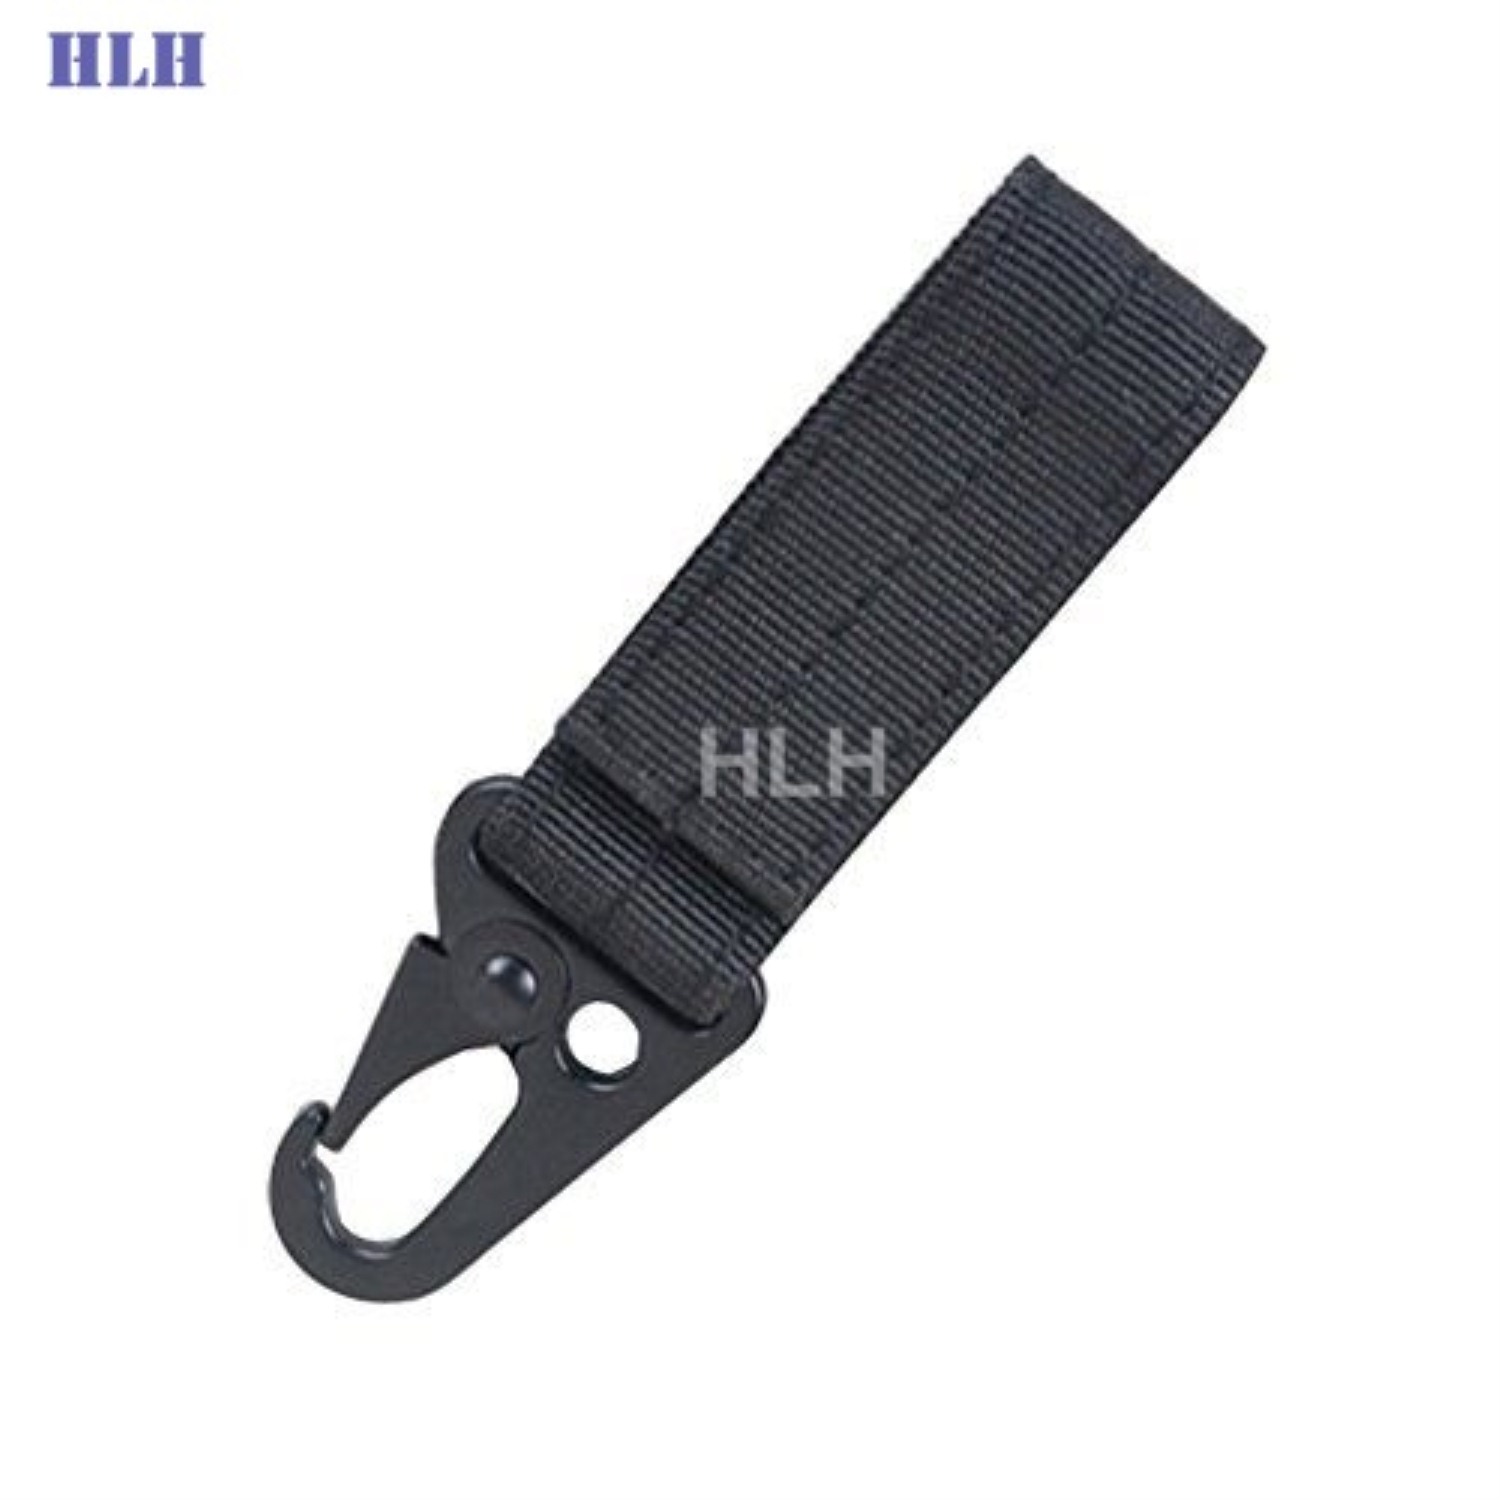 Outdoor Military Hiking Belt Tactical Molle Key Chain Black